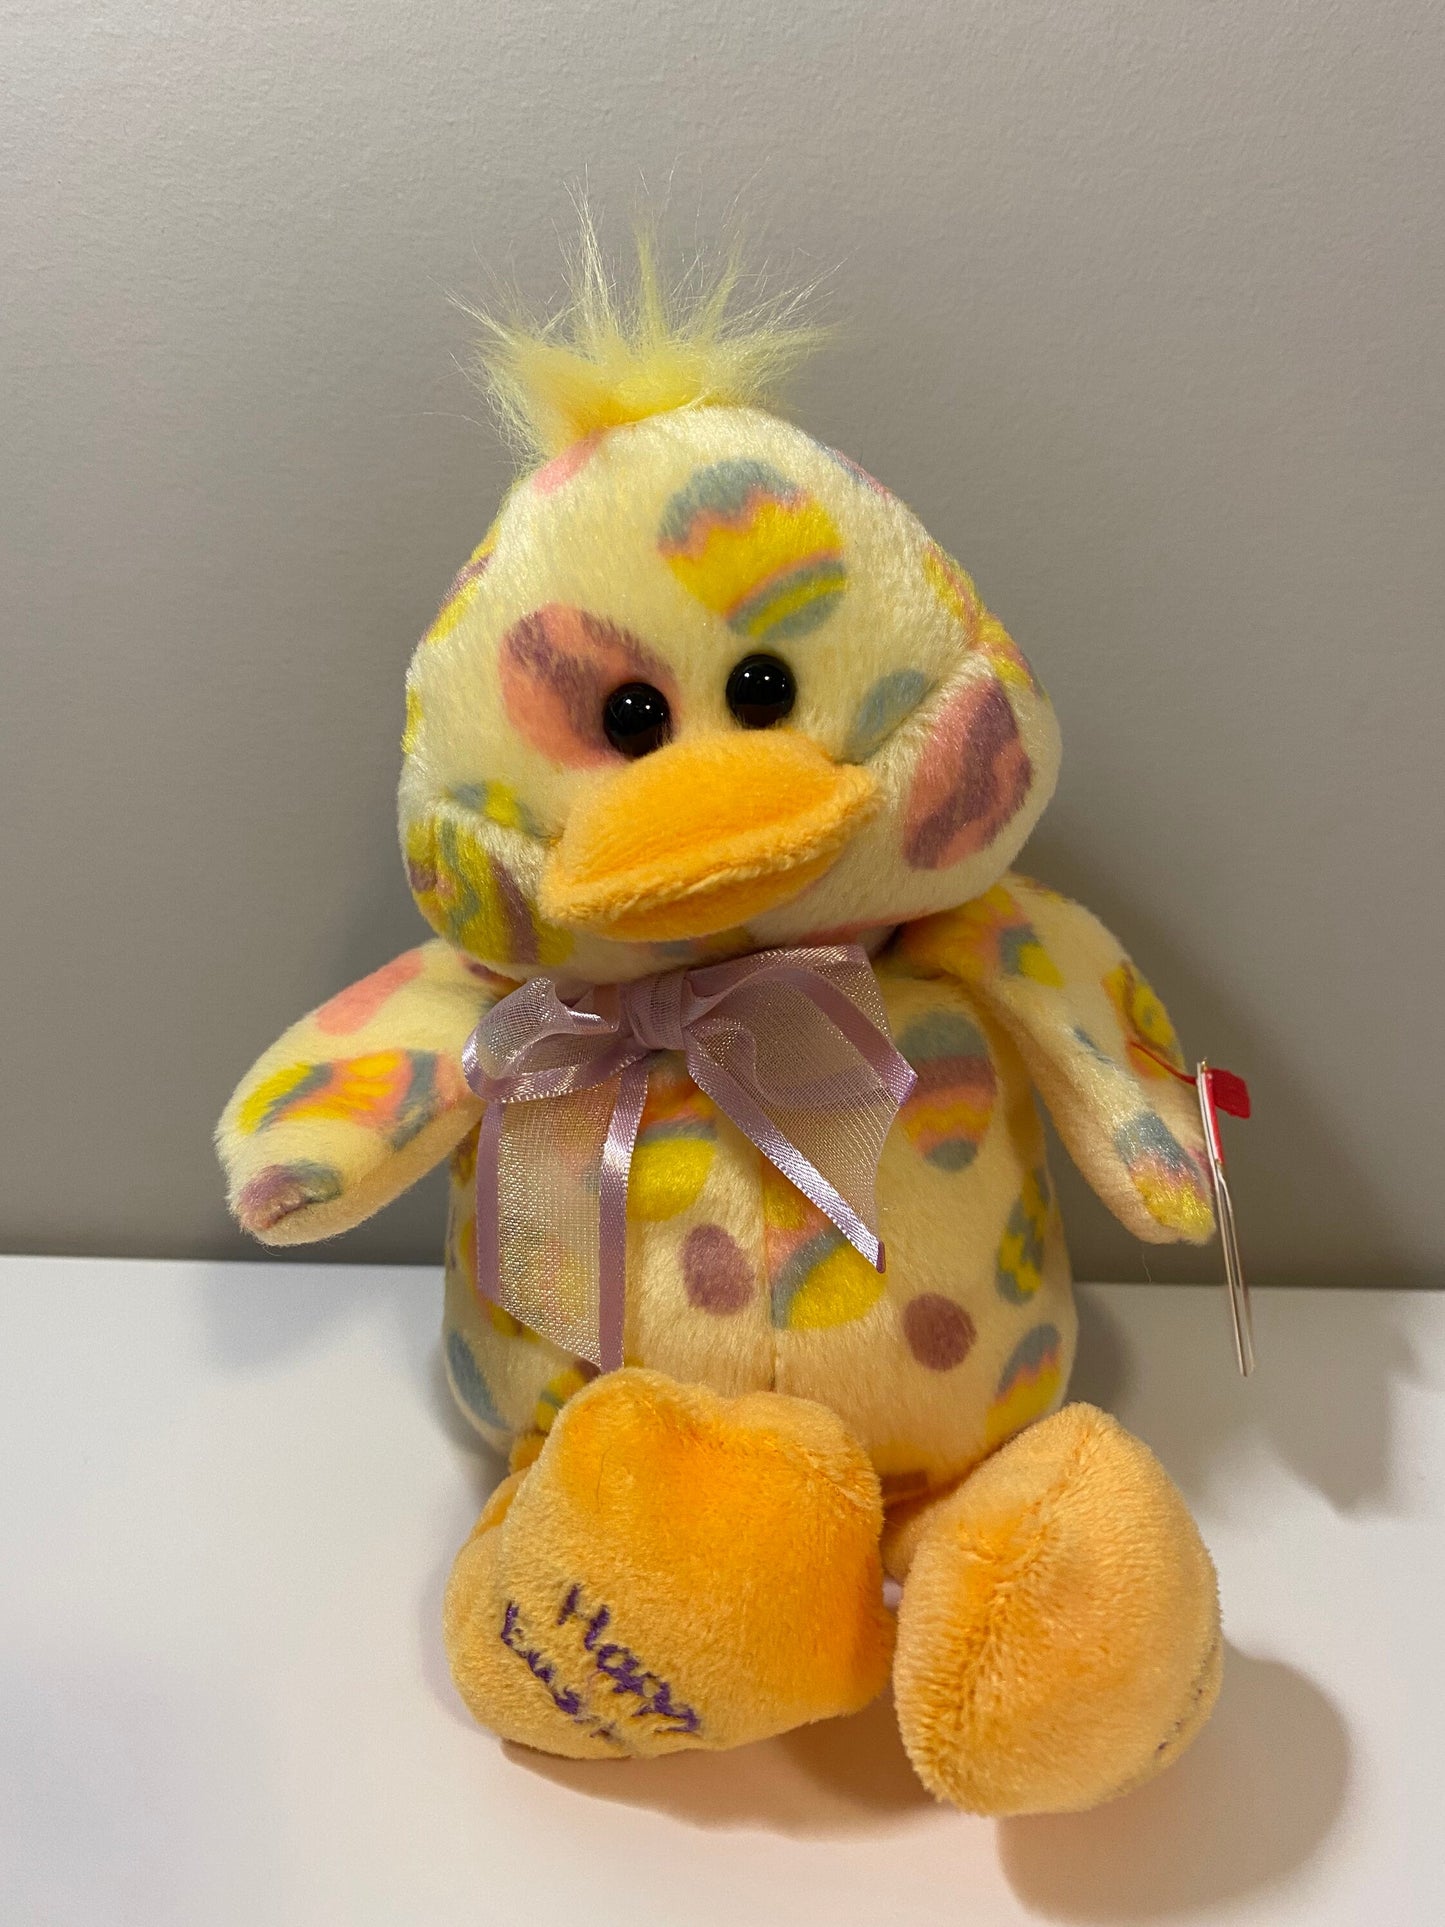 Ty Beanie Baby “Quackington” the Easter Duck! (6 inch)